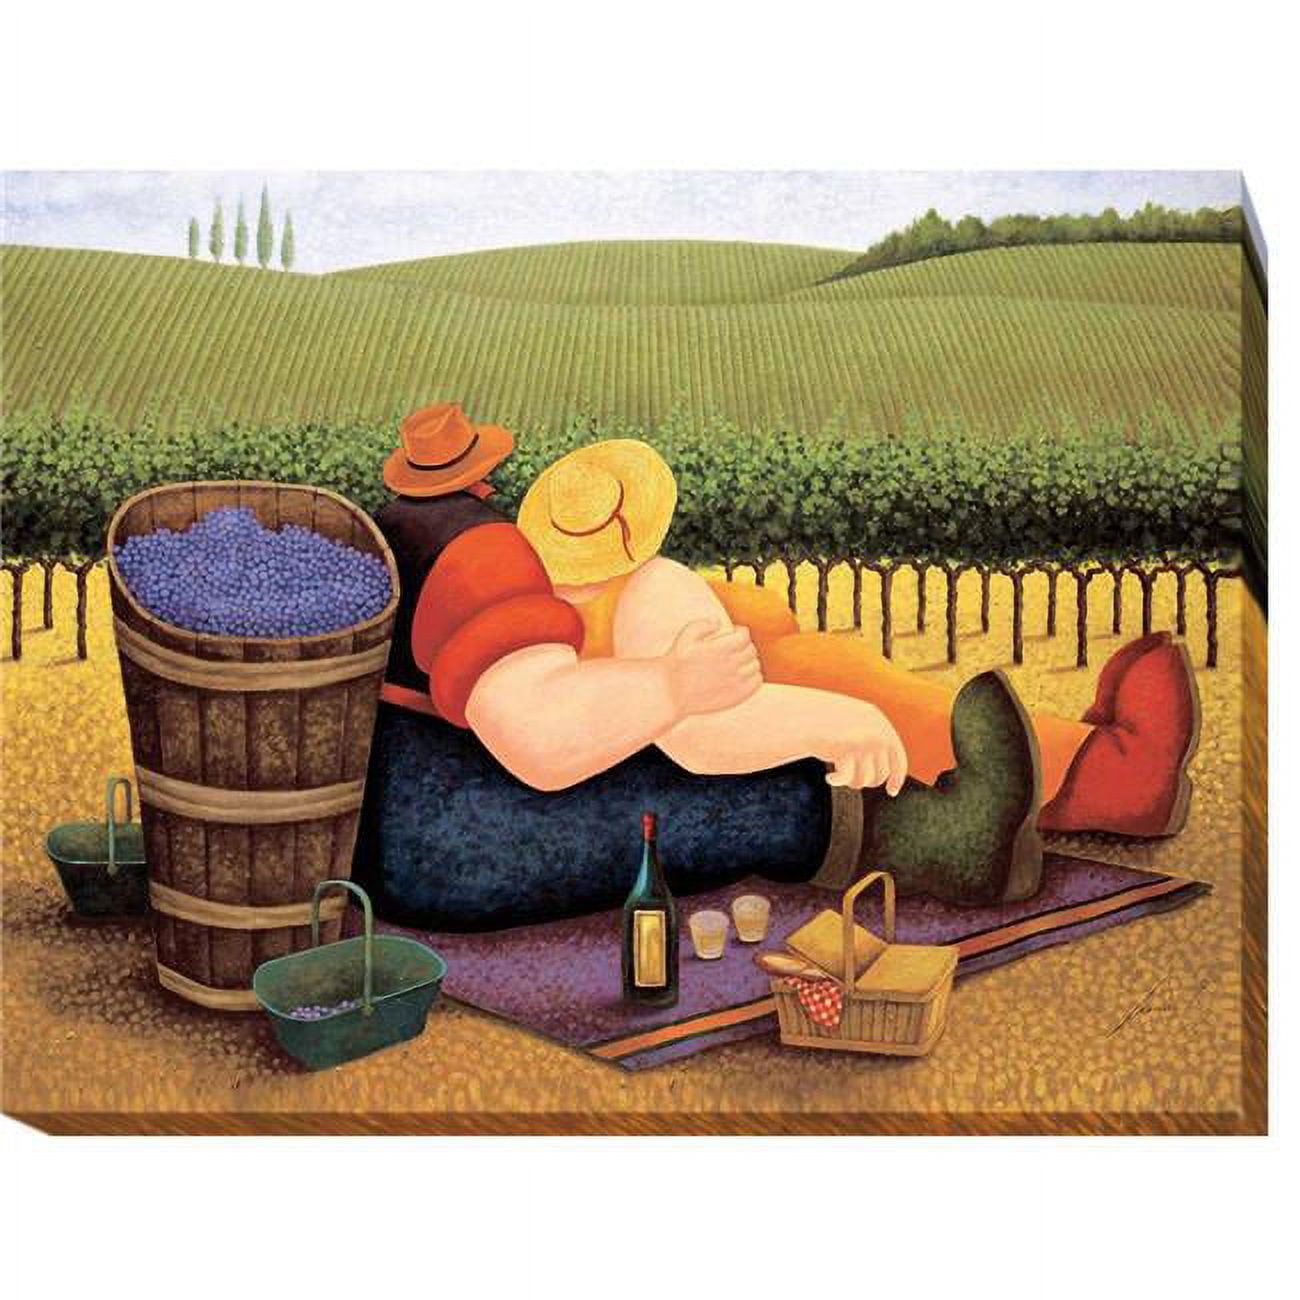 3040l394ig Summer Picnic By Lowell Herrero Premium Oversize Gallery-wrapped Canvas Giclee Art - 30 X 40 X 1.5 In.